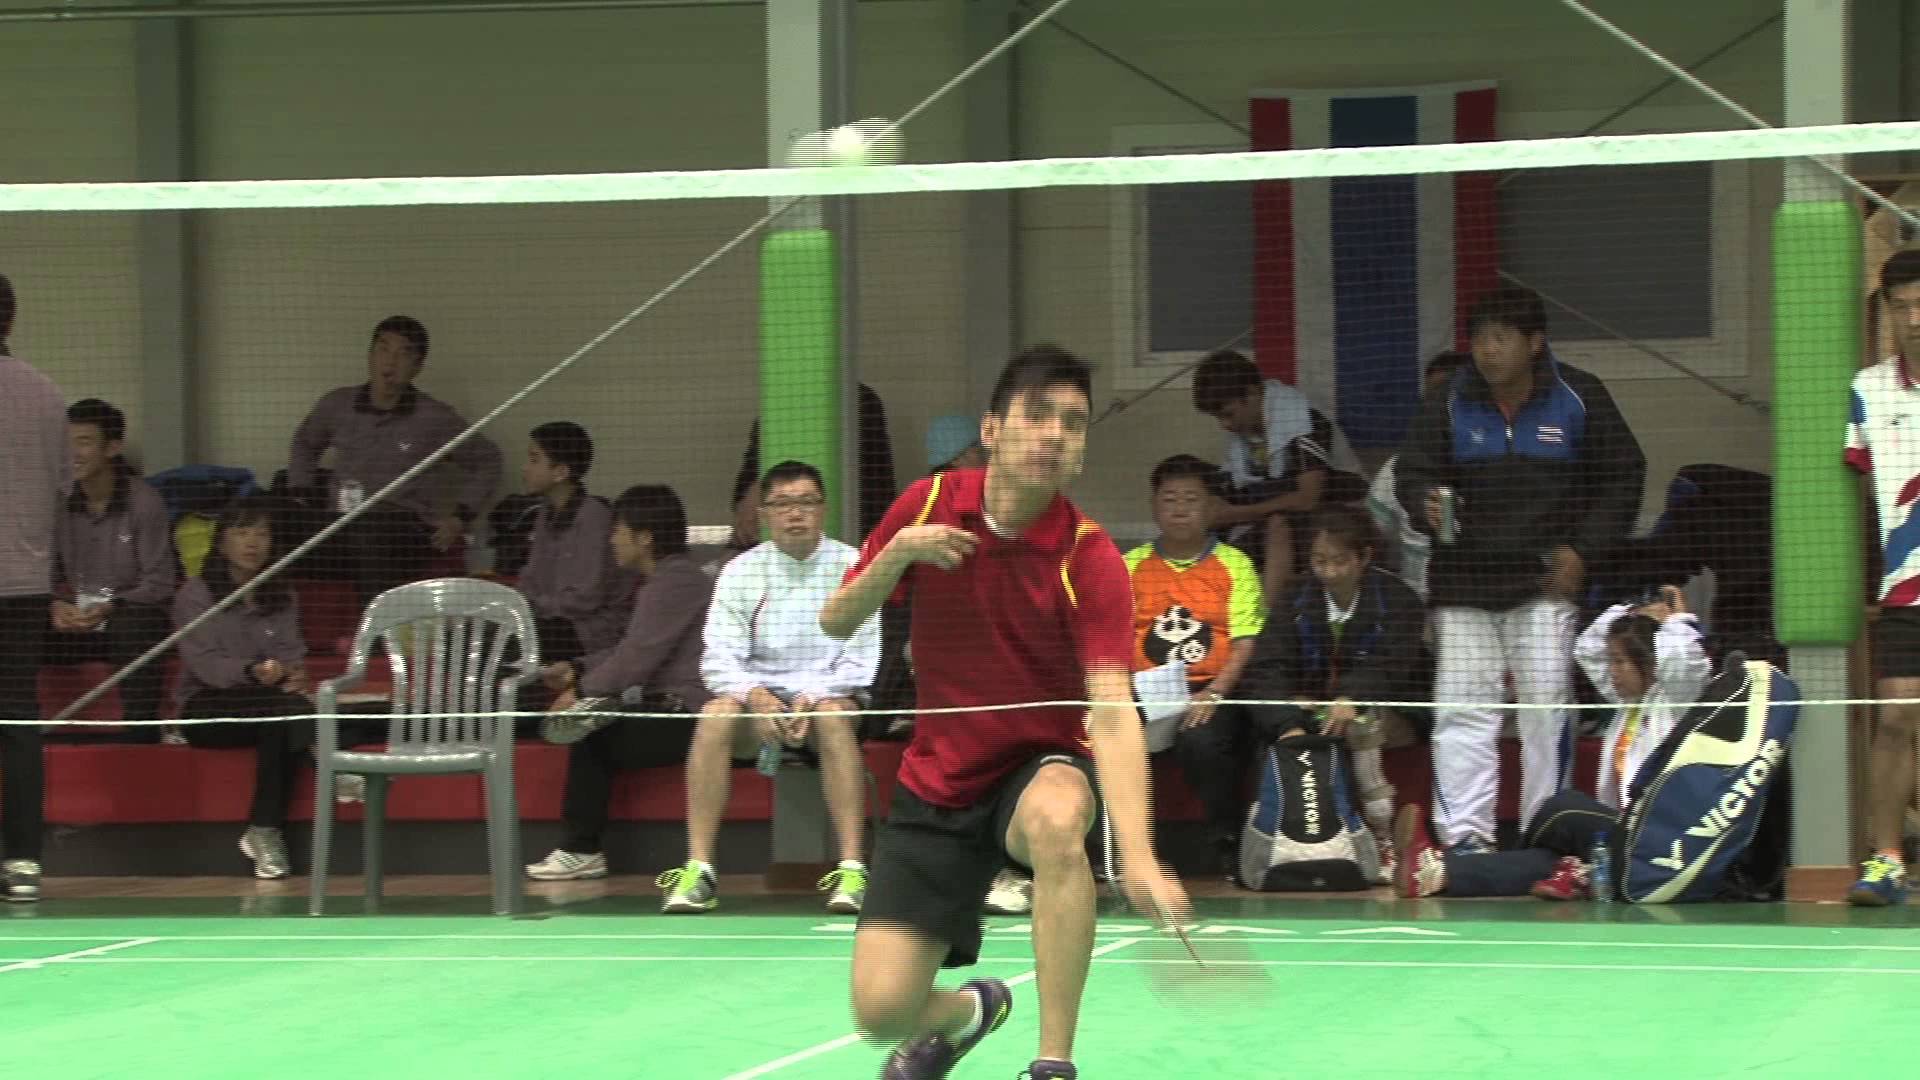 Singapore's Tay Wei Ming claims that he has been inspired by Para-badminton ©YouTube